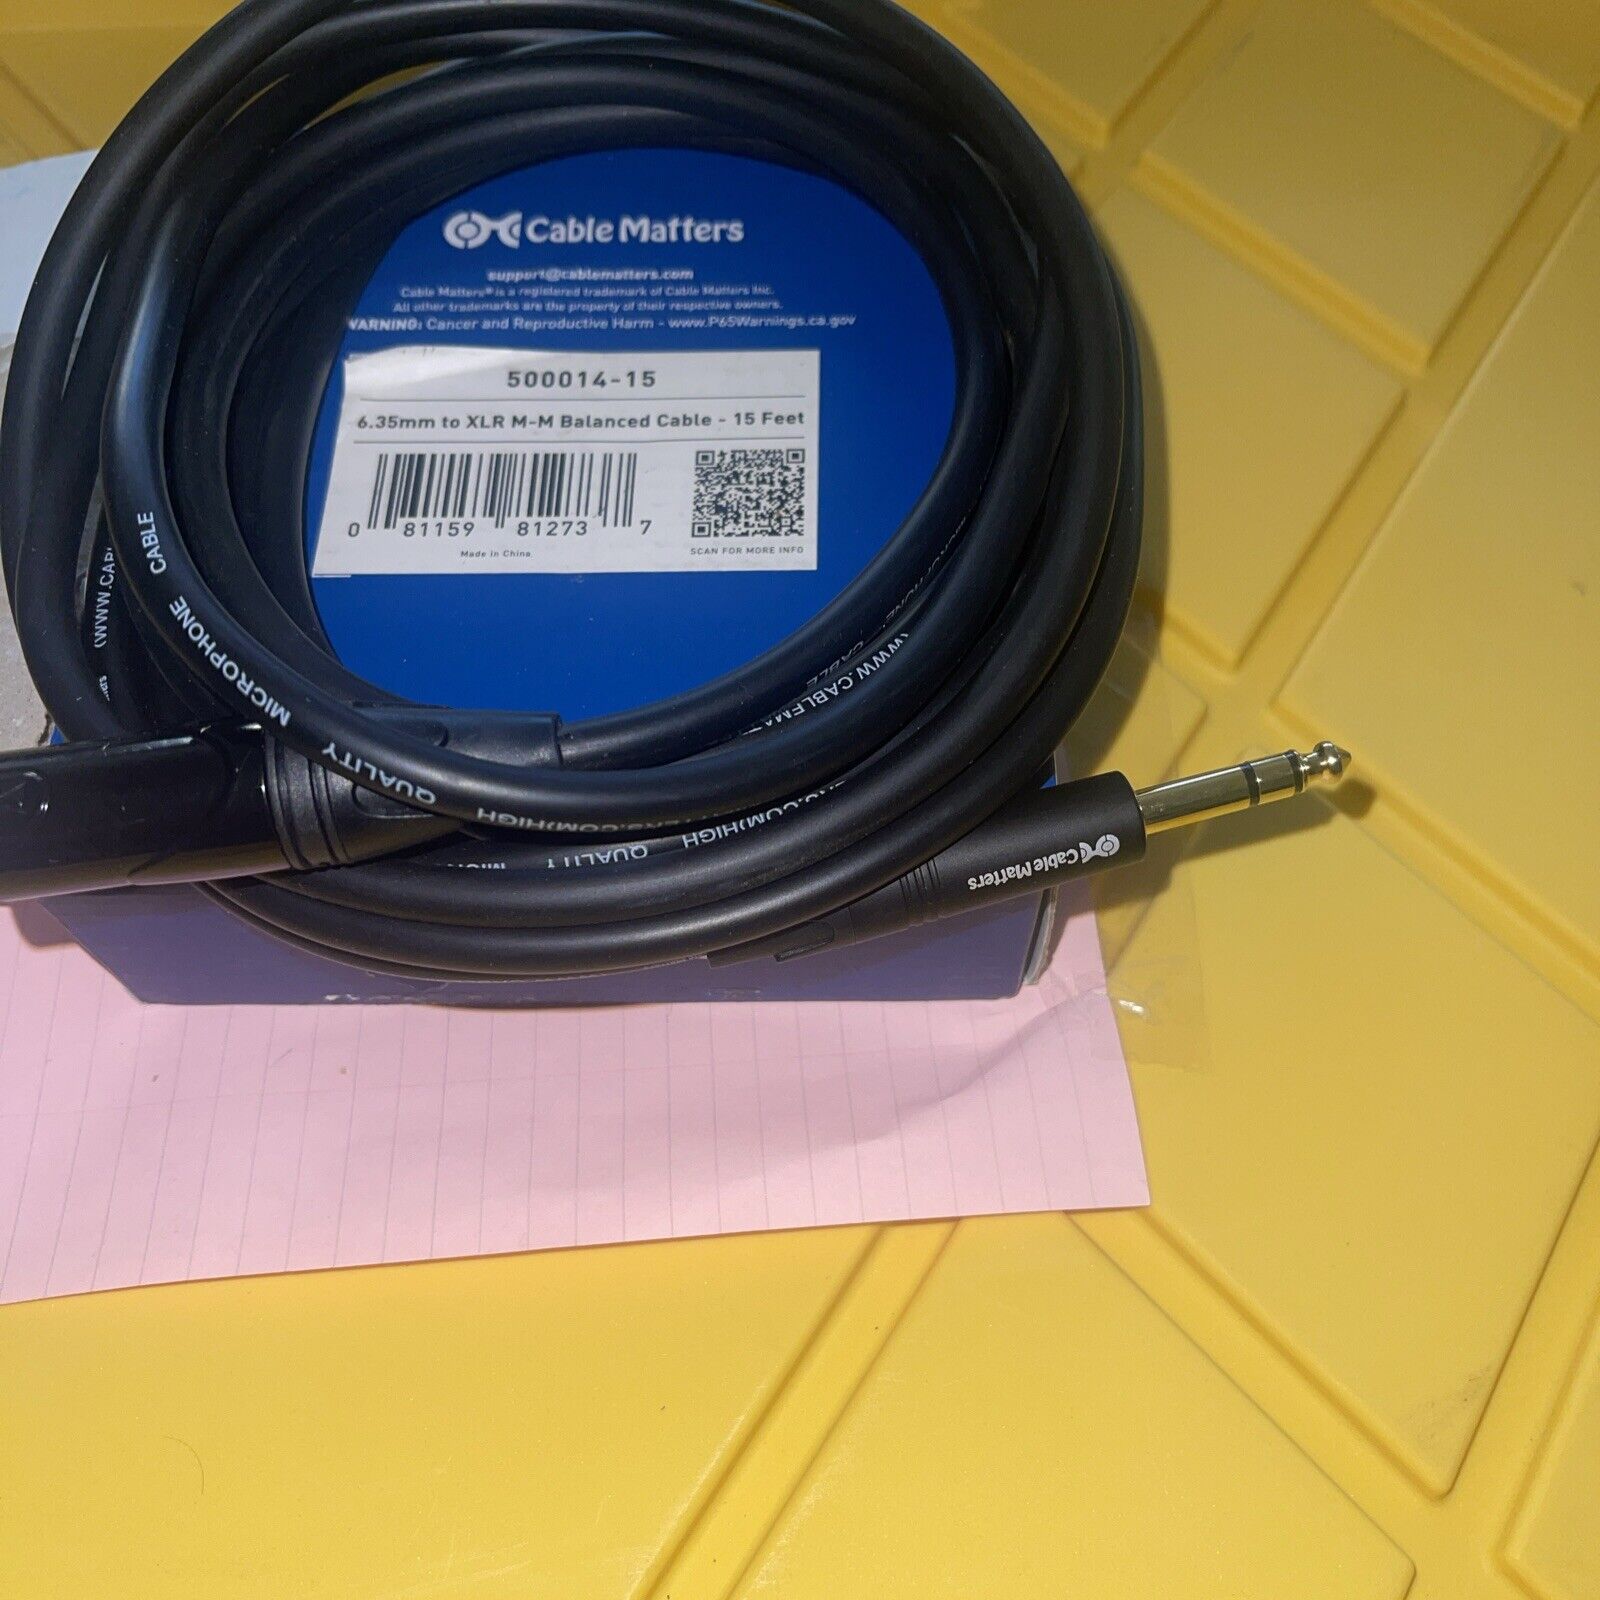 Genuine Cable Matters 6.35MM TRS to XLR M-F Balanced Cable - 15 ft Length